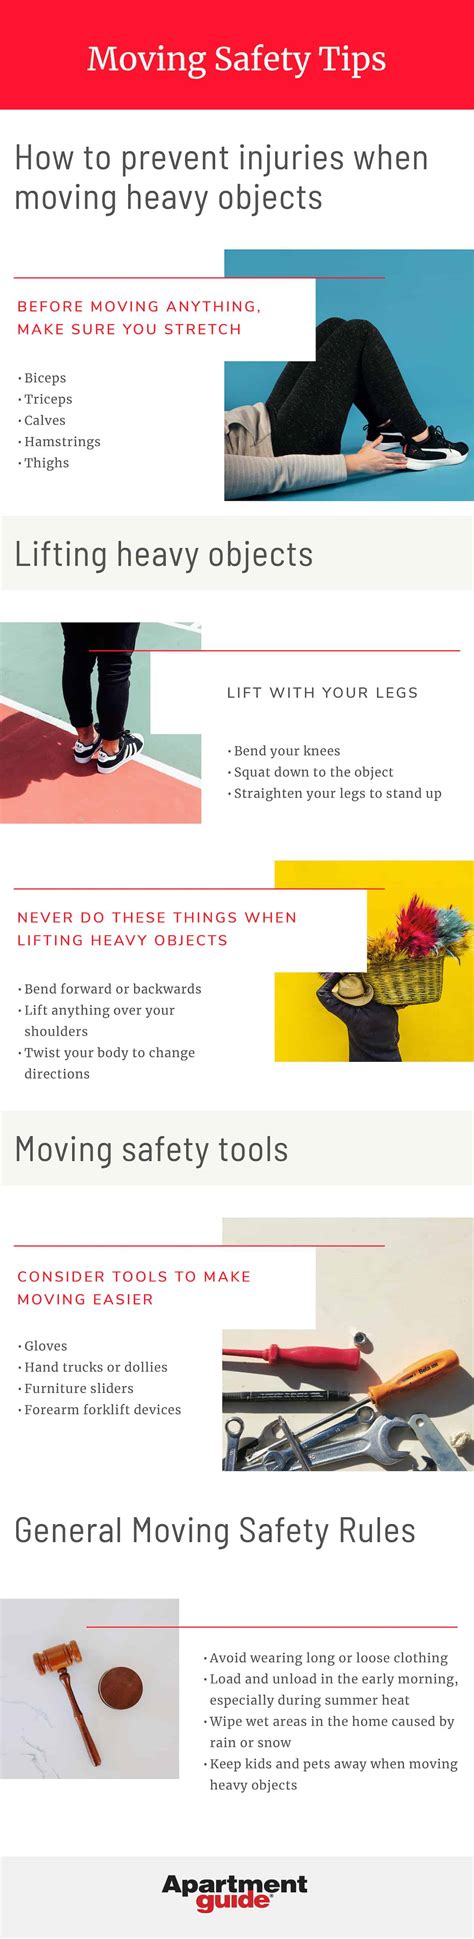 Moving Safety Tips Infographic